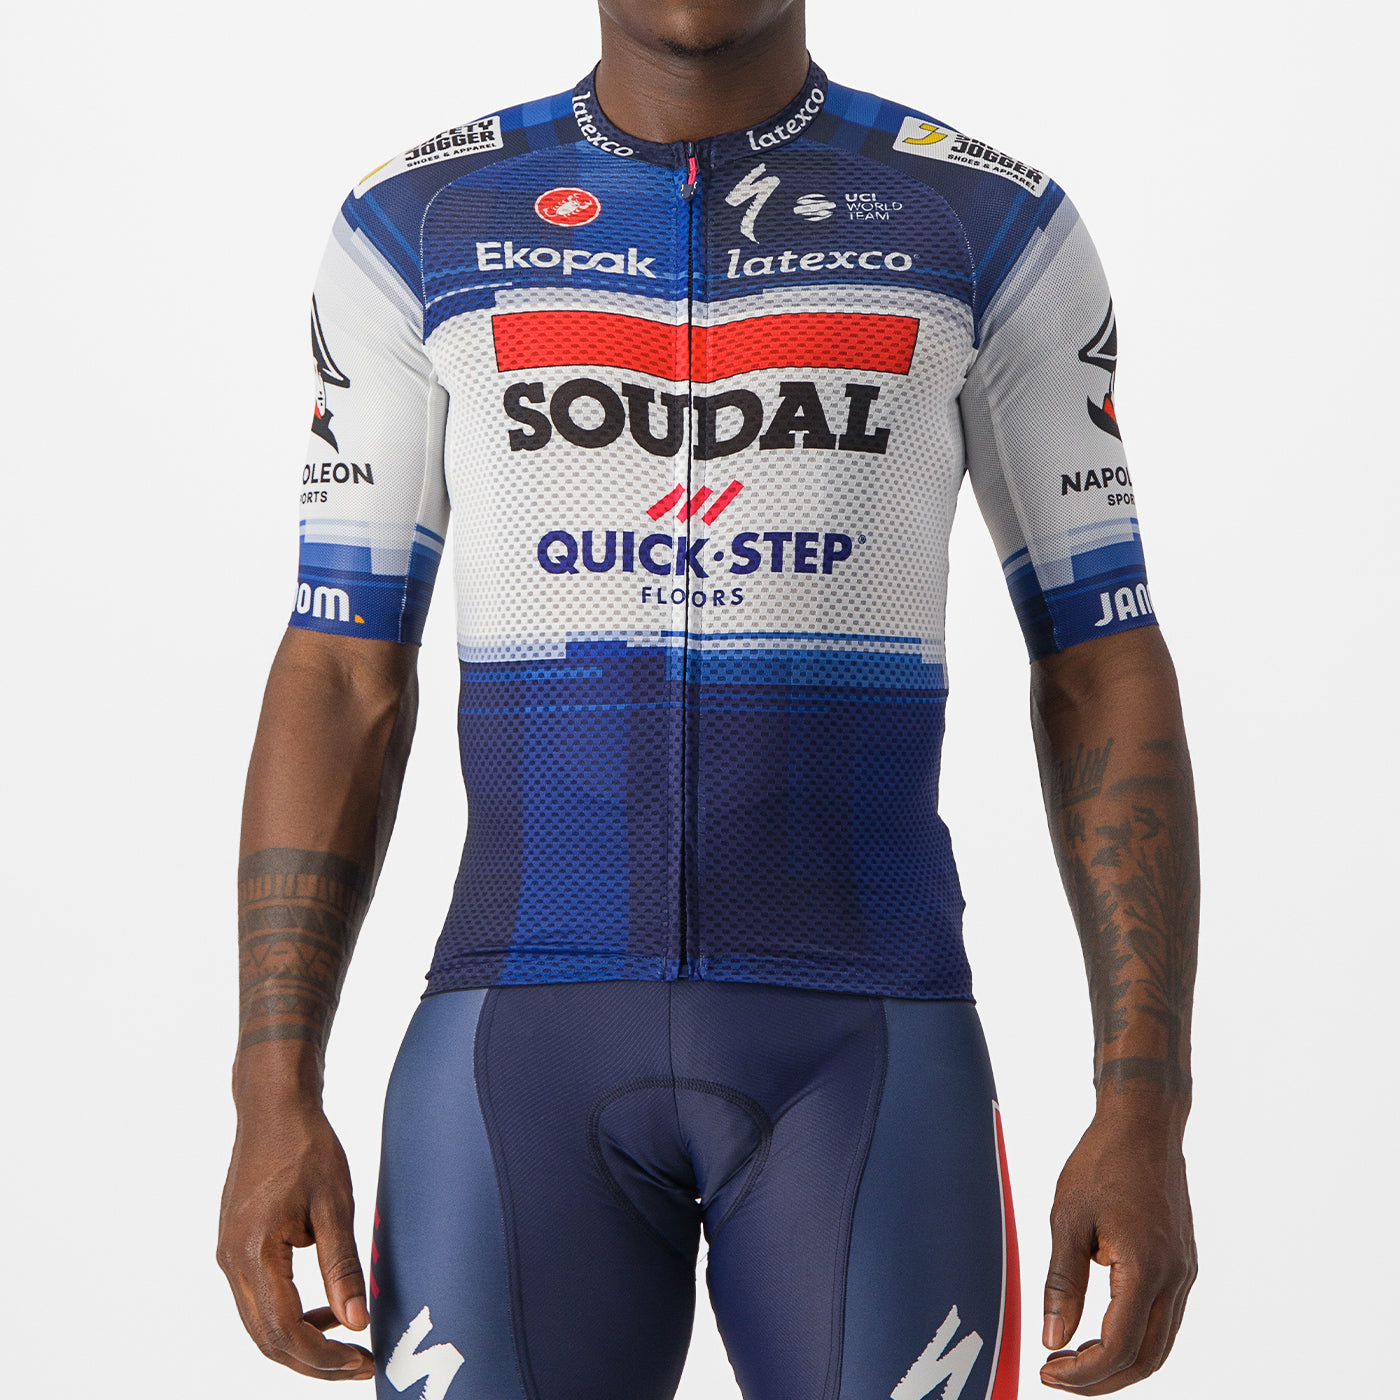 Soudal Quick-Step Climber's 3.1 jersey | All4cycling